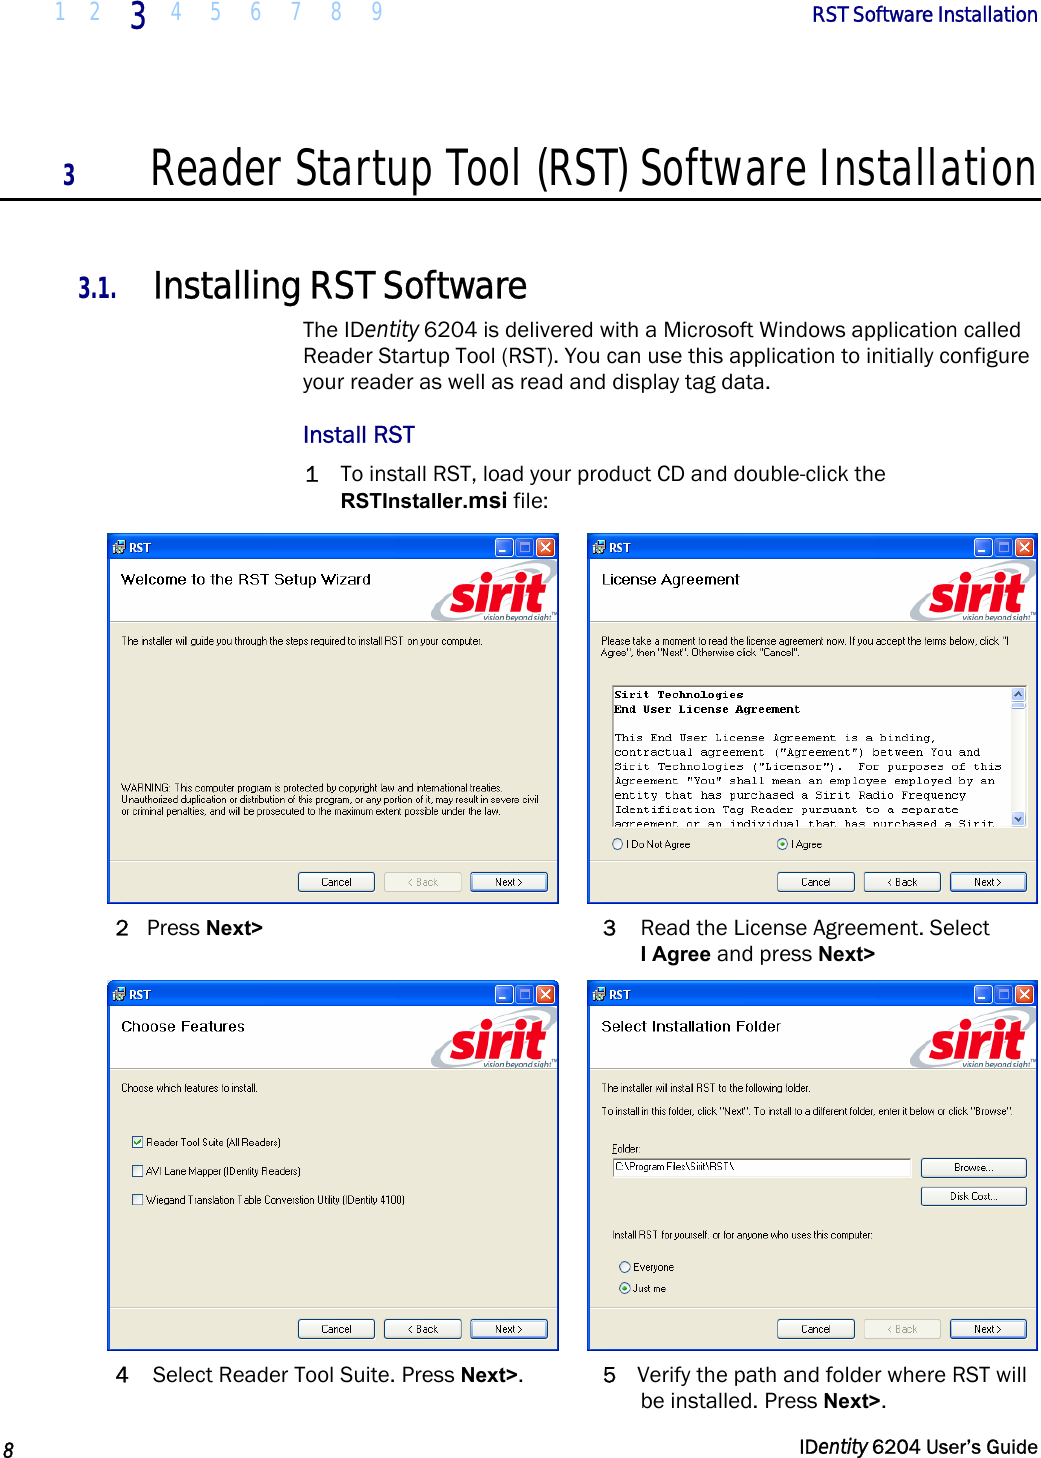  1 2  3  4 5 6 7 8 9        RST Software Installation   8   IDentity 6204 User’s Guide  3 Reader Startup Tool (RST) Software Installation  3.1. Installing RST Software The IDentity 6204 is delivered with a Microsoft Windows application called Reader Startup Tool (RST). You can use this application to initially configure your reader as well as read and display tag data.  Install RST 1 To install RST, load your product CD and double-click the RSTInstaller.msi file:    2 Press Next&gt; 3  Read the License Agreement. Select  I Agree and press Next&gt;    4  Select Reader Tool Suite. Press Next&gt;.  5  Verify the path and folder where RST will be installed. Press Next&gt;. 